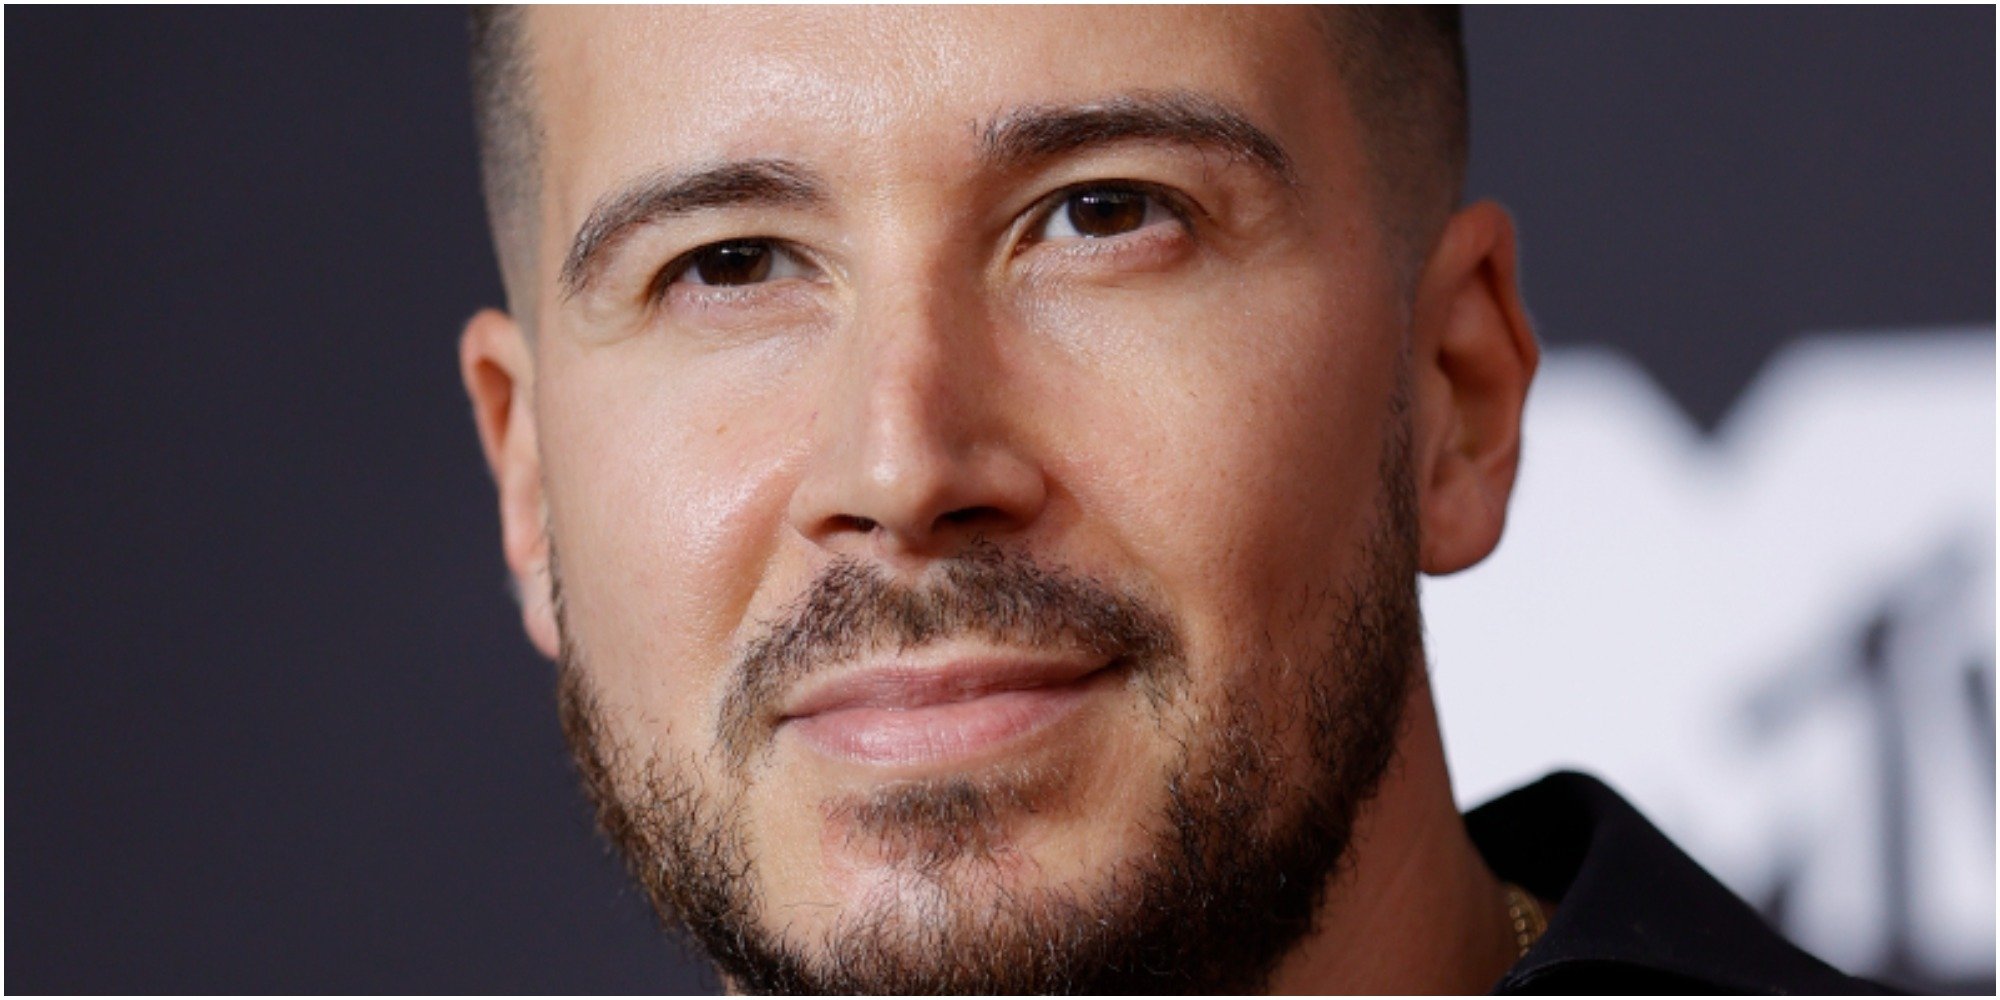 Vinny Guadagnino photographed on the red carpet.